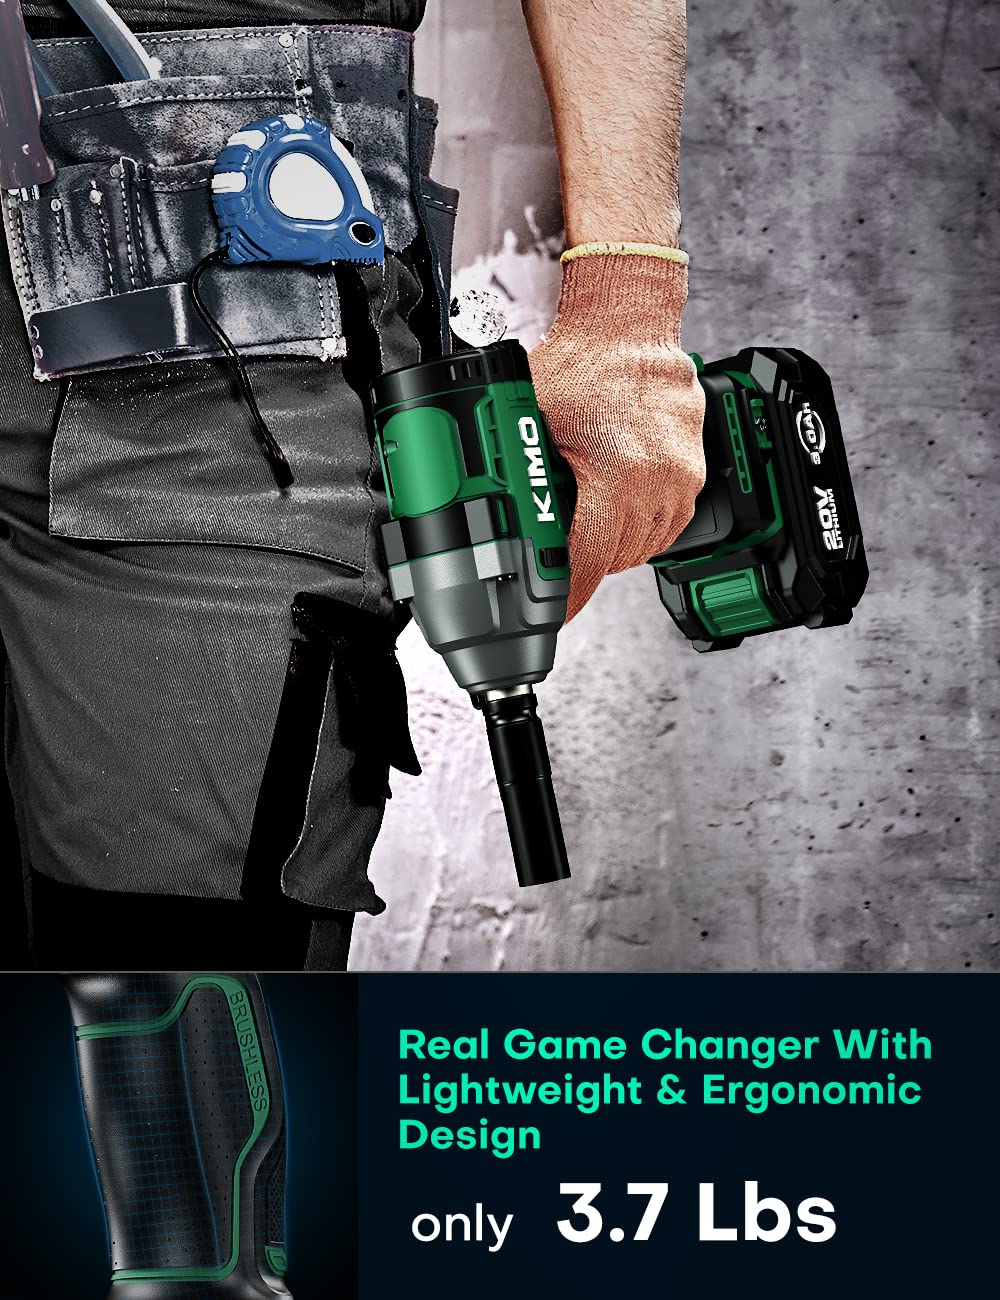 KIMO Cordless Impact Wrench, 3000 RPM, 1/2 Impact Gun with 3.0Ah Li-ion Battery, 7 Drive Impact Sockets, 3 Inch Extension Bar, 1 Hour Fast Charger,1/2 Impact Driver w/Max Torque 260 ft-lbs (350N.m)